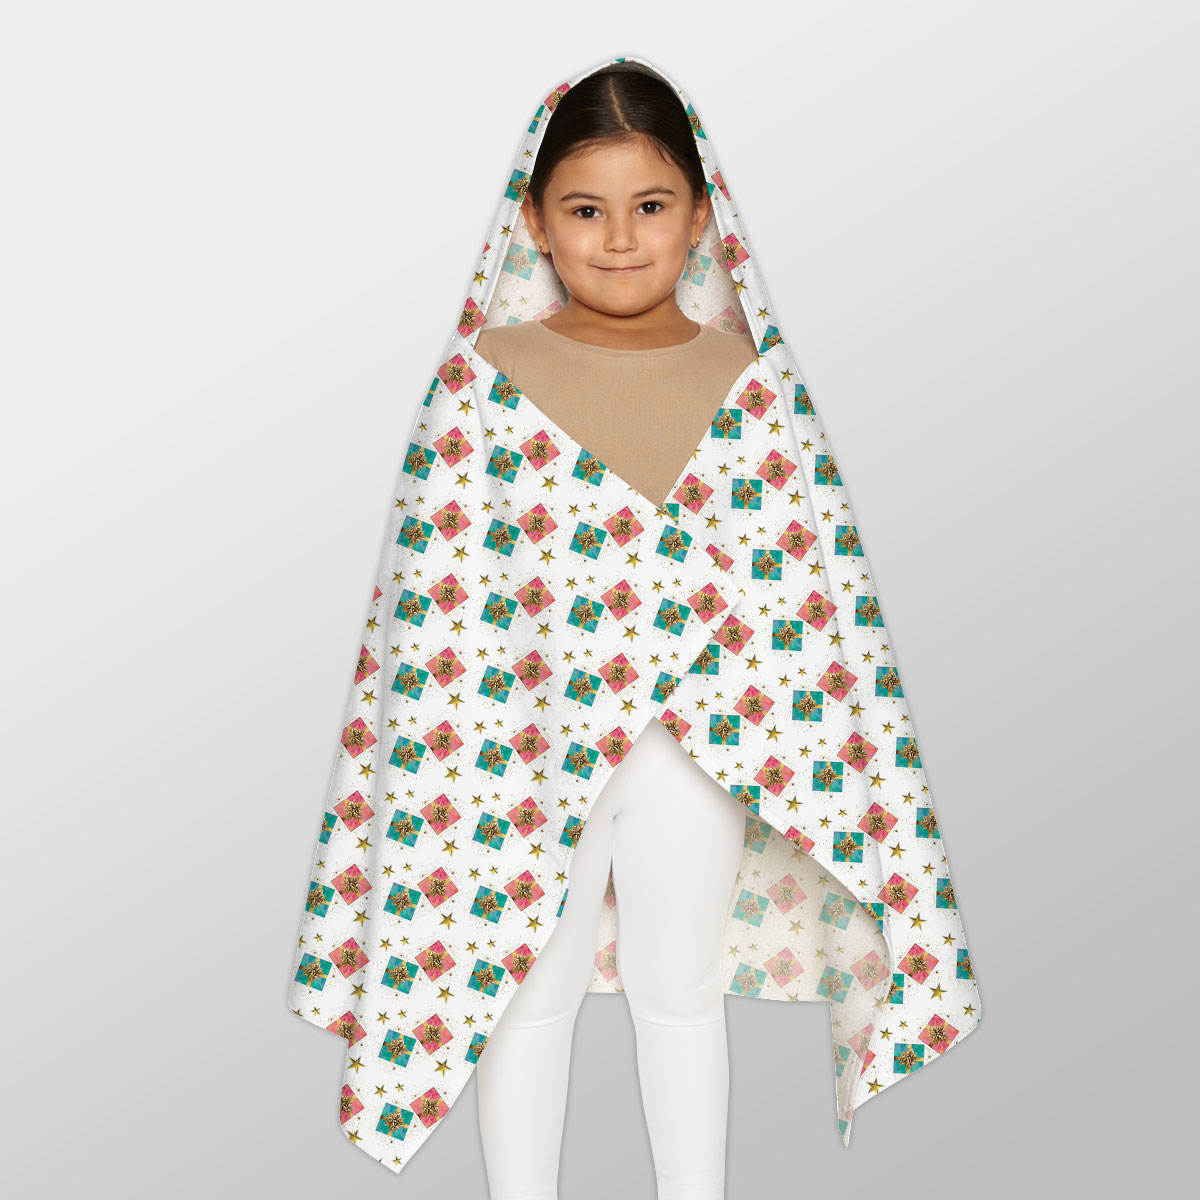 Christmas Gifts, Christmas Present Ideas, Christmas Pattern Youth Hooded Towel